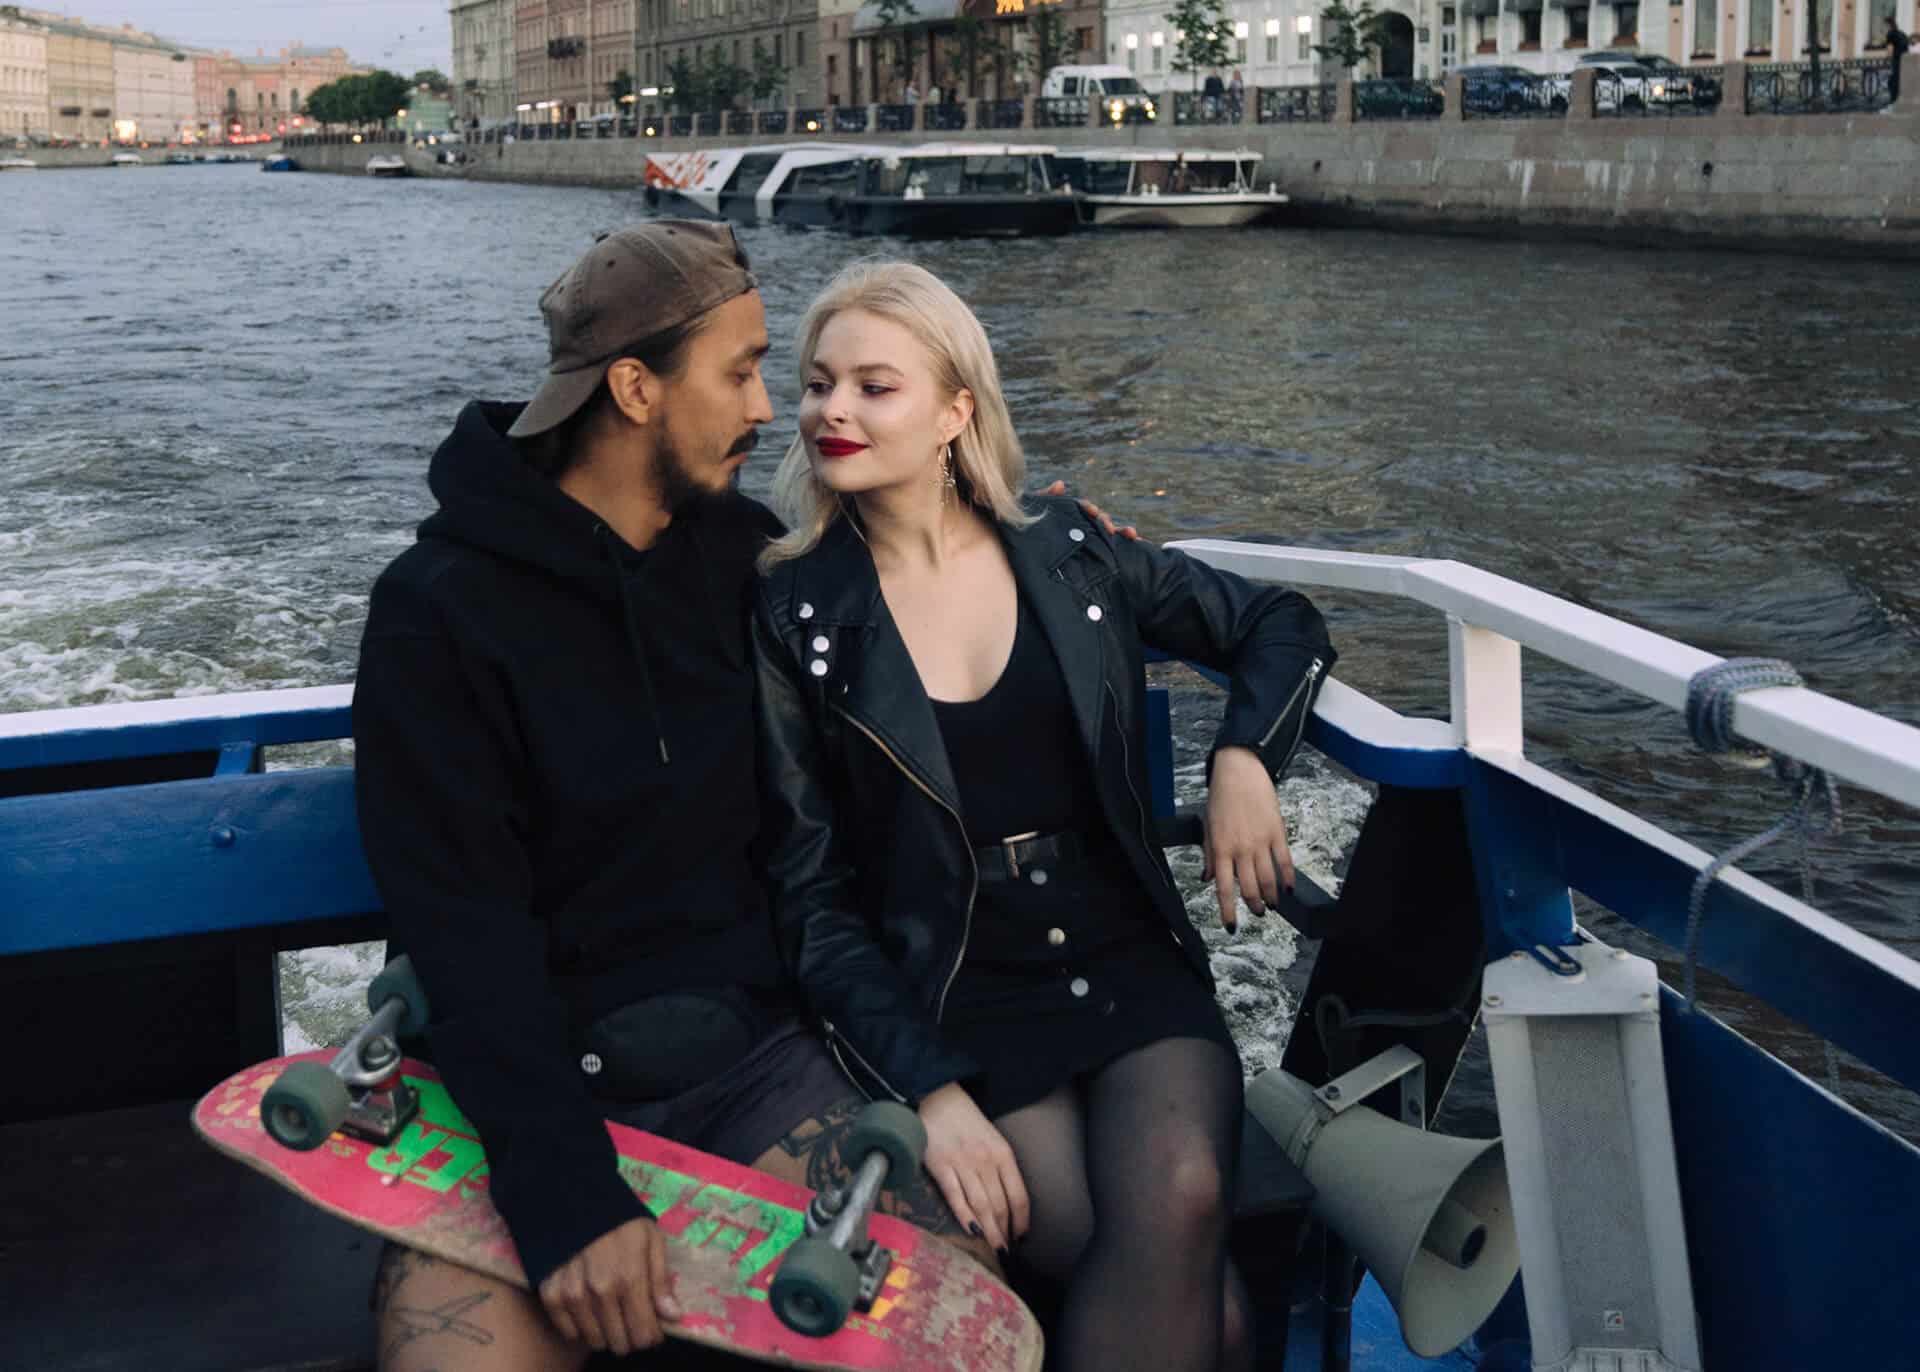 couple on third date on a boat